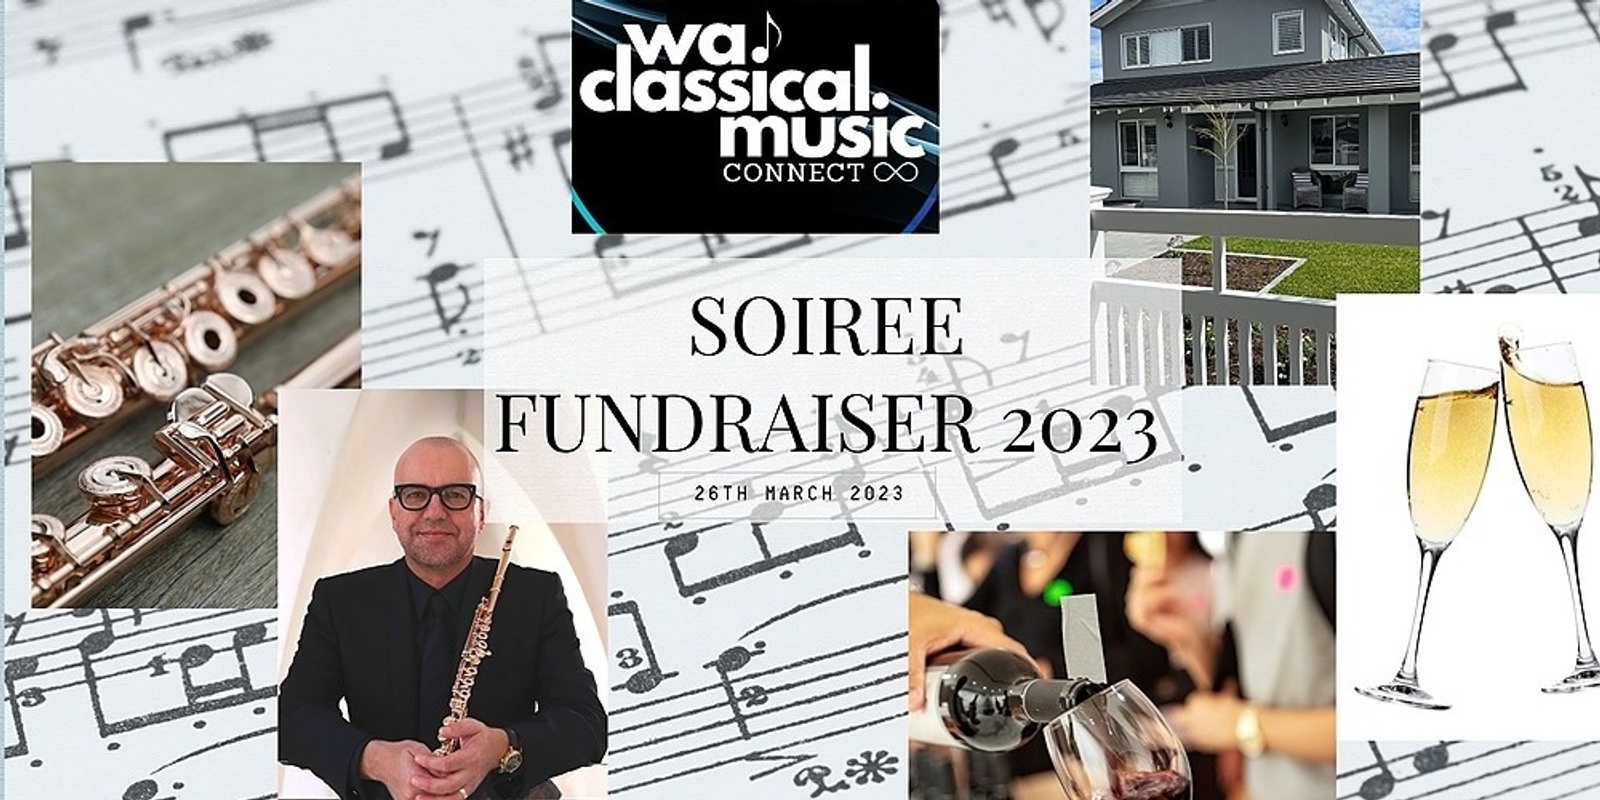 Soiree Fundraiser for WA Classical Music Connect 2023